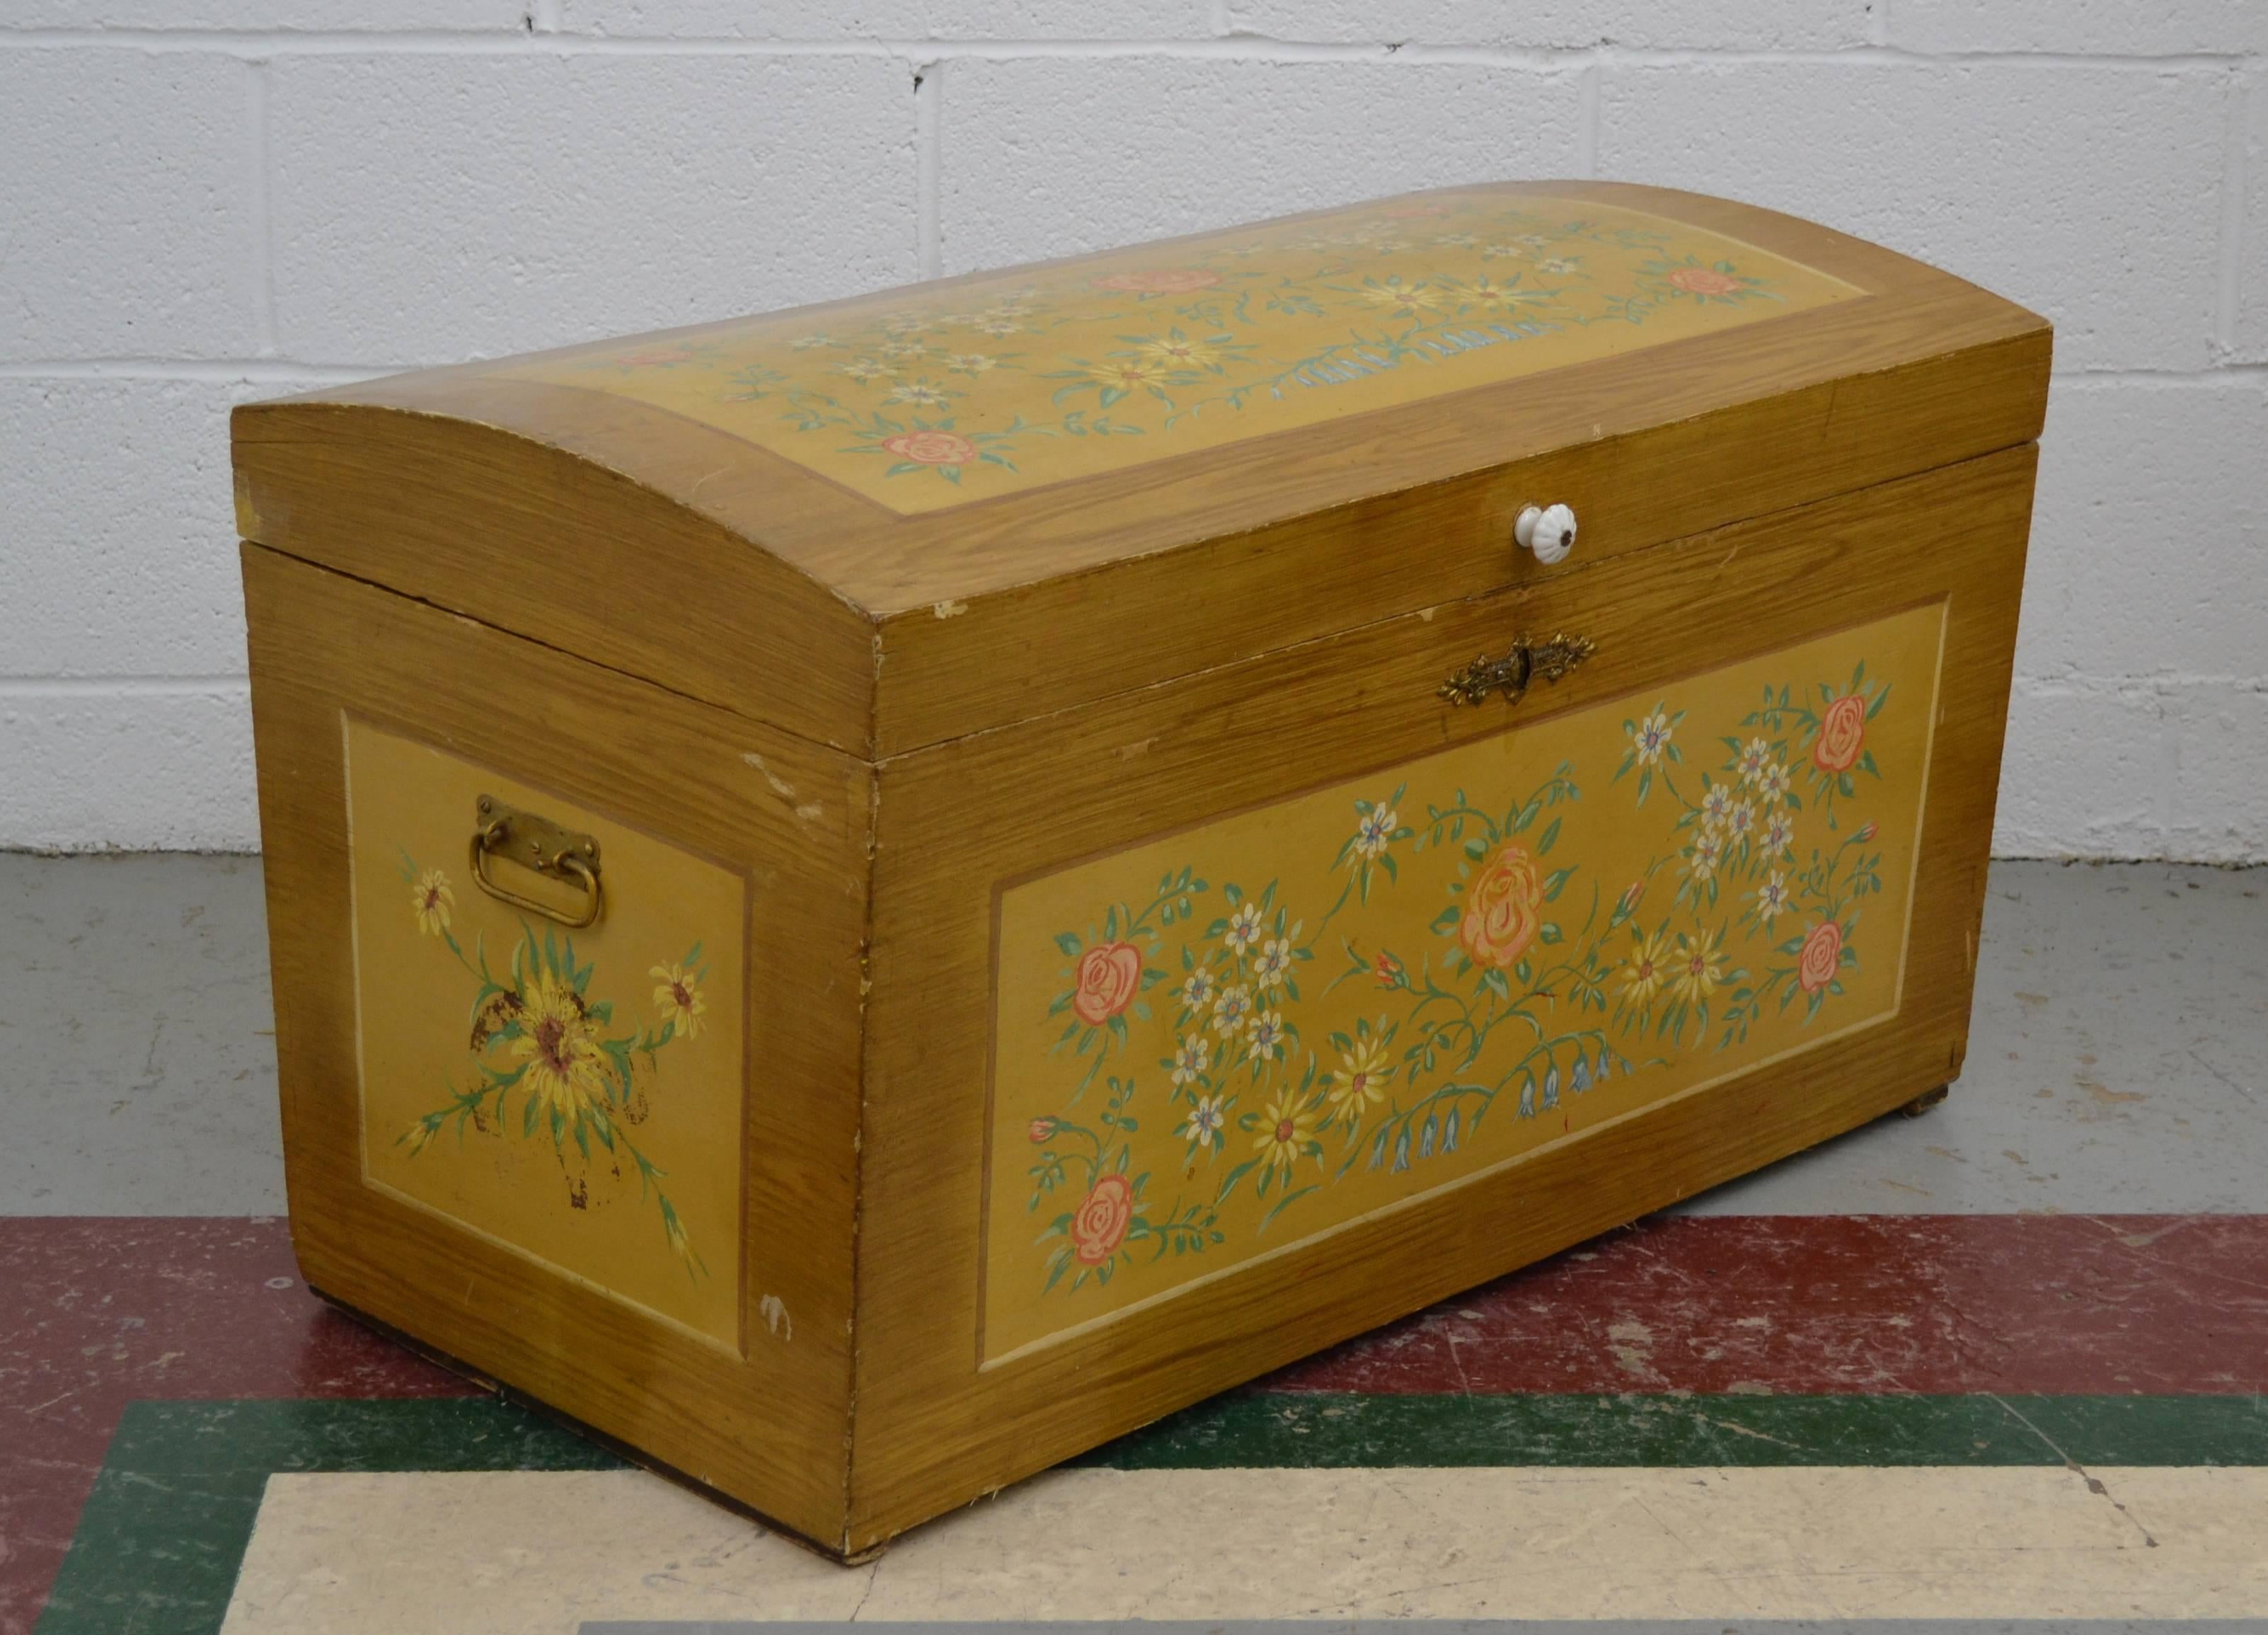 A lovely small pine dome top trunk of hand-cut dovetailed construction, hand-painted all-over in a light brown grain paint with floral decorated faux panels on the top and on three sides. The paintwork has a clear varnish finish and so has remained